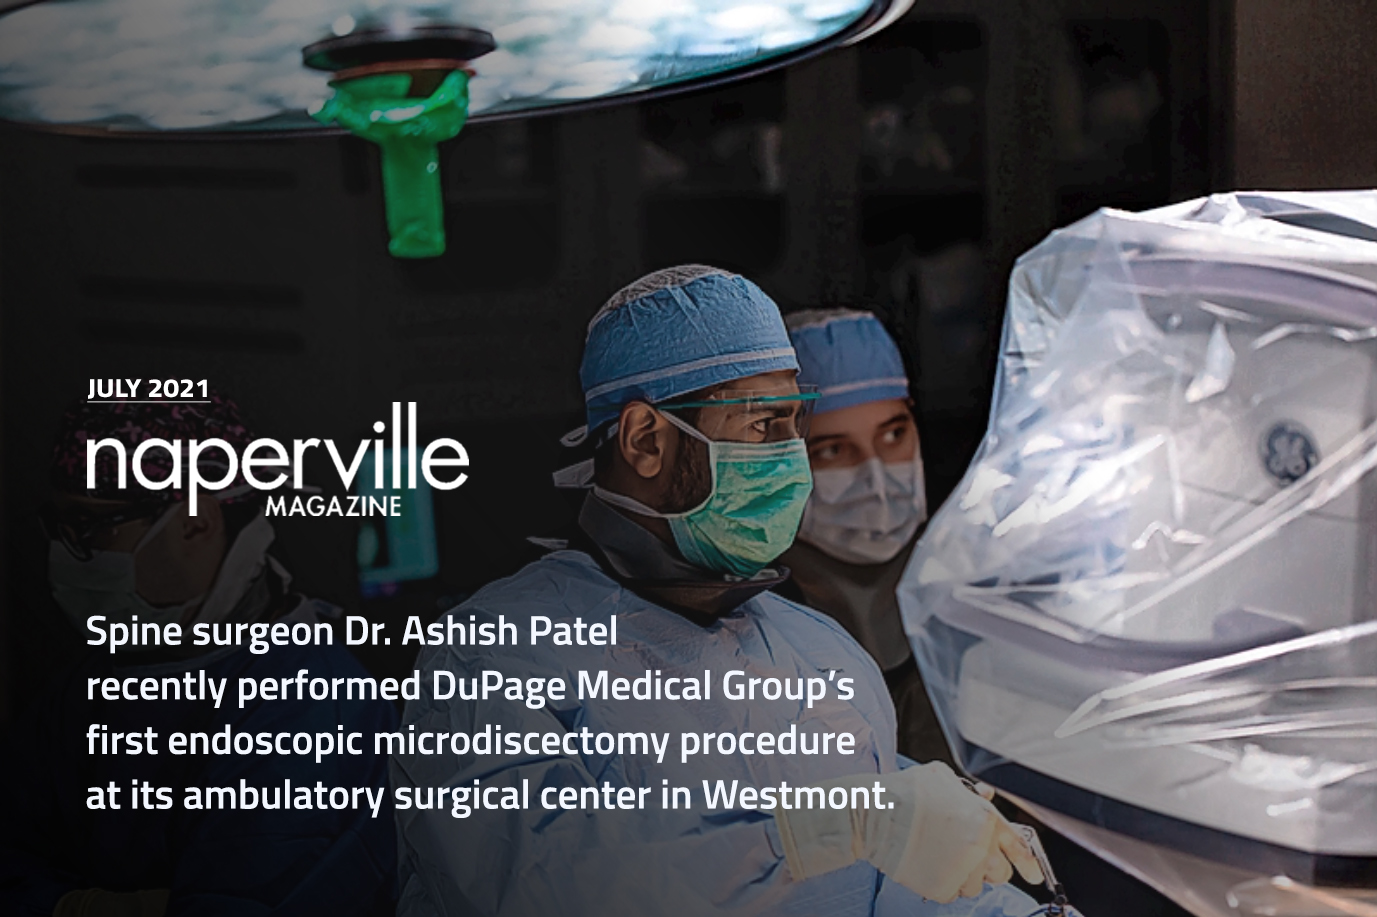 https://mdashishpatel.com/wp-content/uploads/2022/01/spine-surgeon-ashish-patel-md-performs-first-endoscopic-microdescectomy-procedure-in-westmont-il.jpg